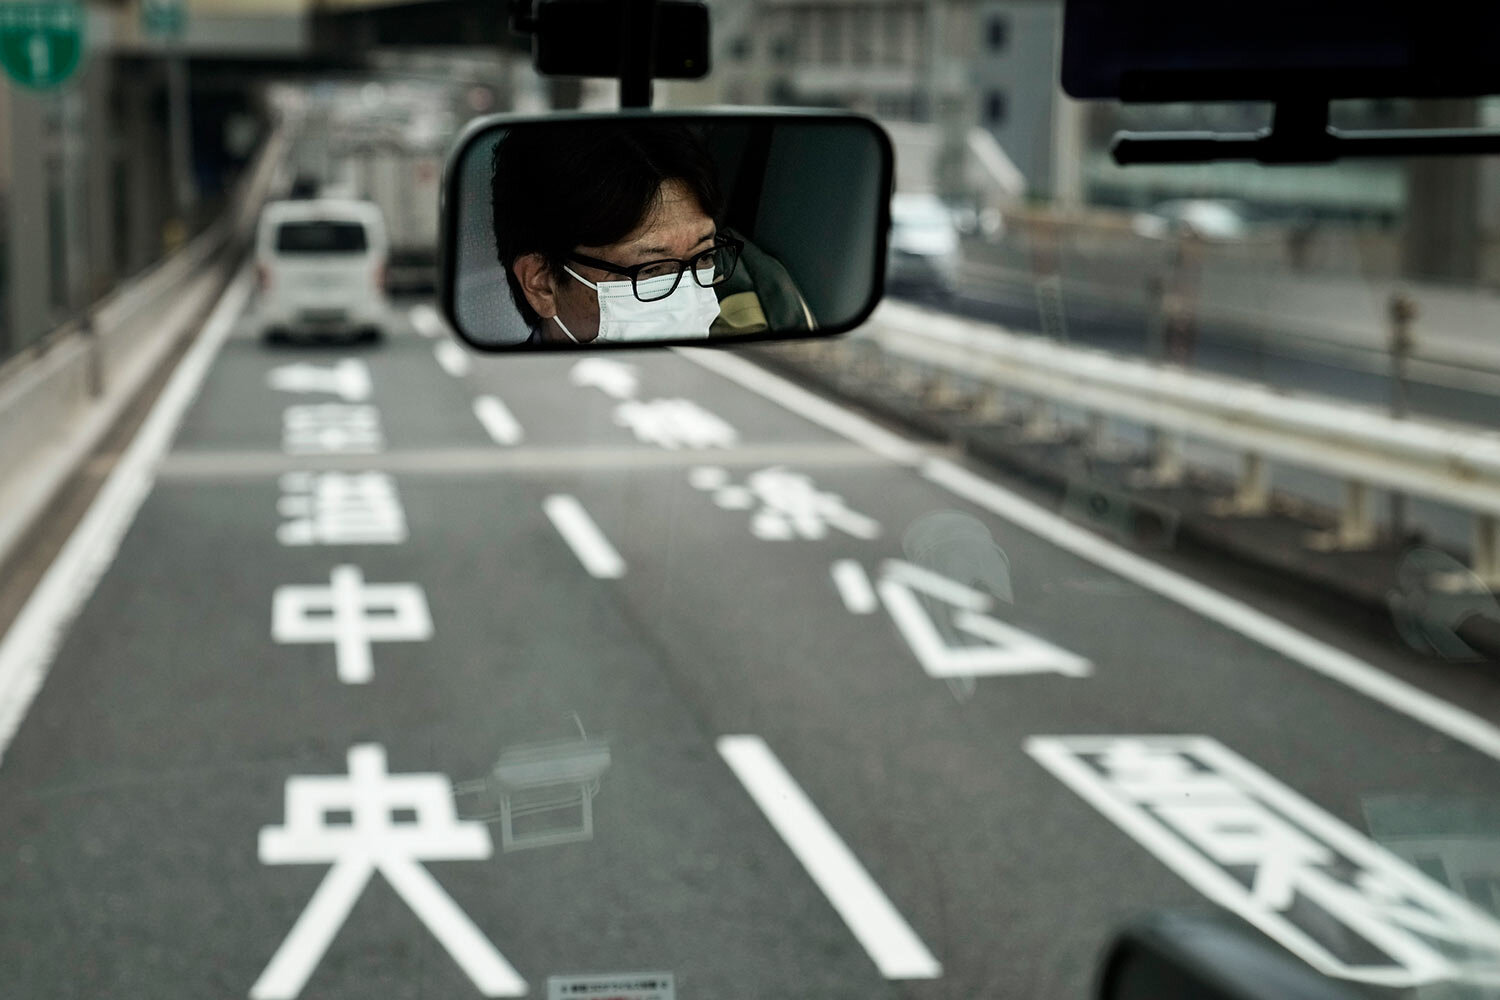  A bus driver is reflected in the mirror, Tuesday, July 13, 2021, in Tokyo. (AP Photo/Jae C. Hong) 